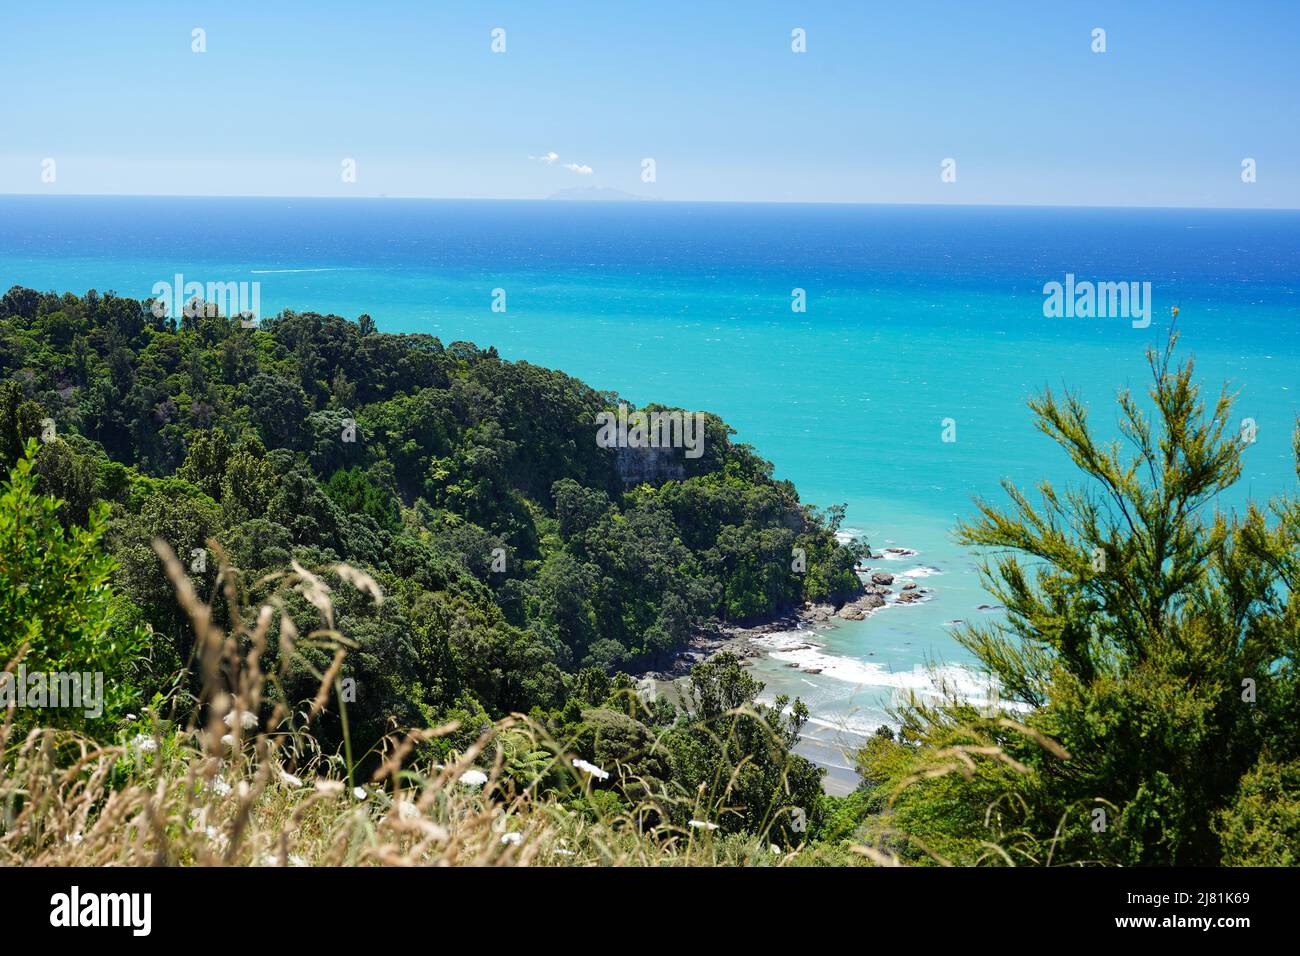 View of the Pacific Ocean from the Bay of Plenty region of New Zealand Stock Photo